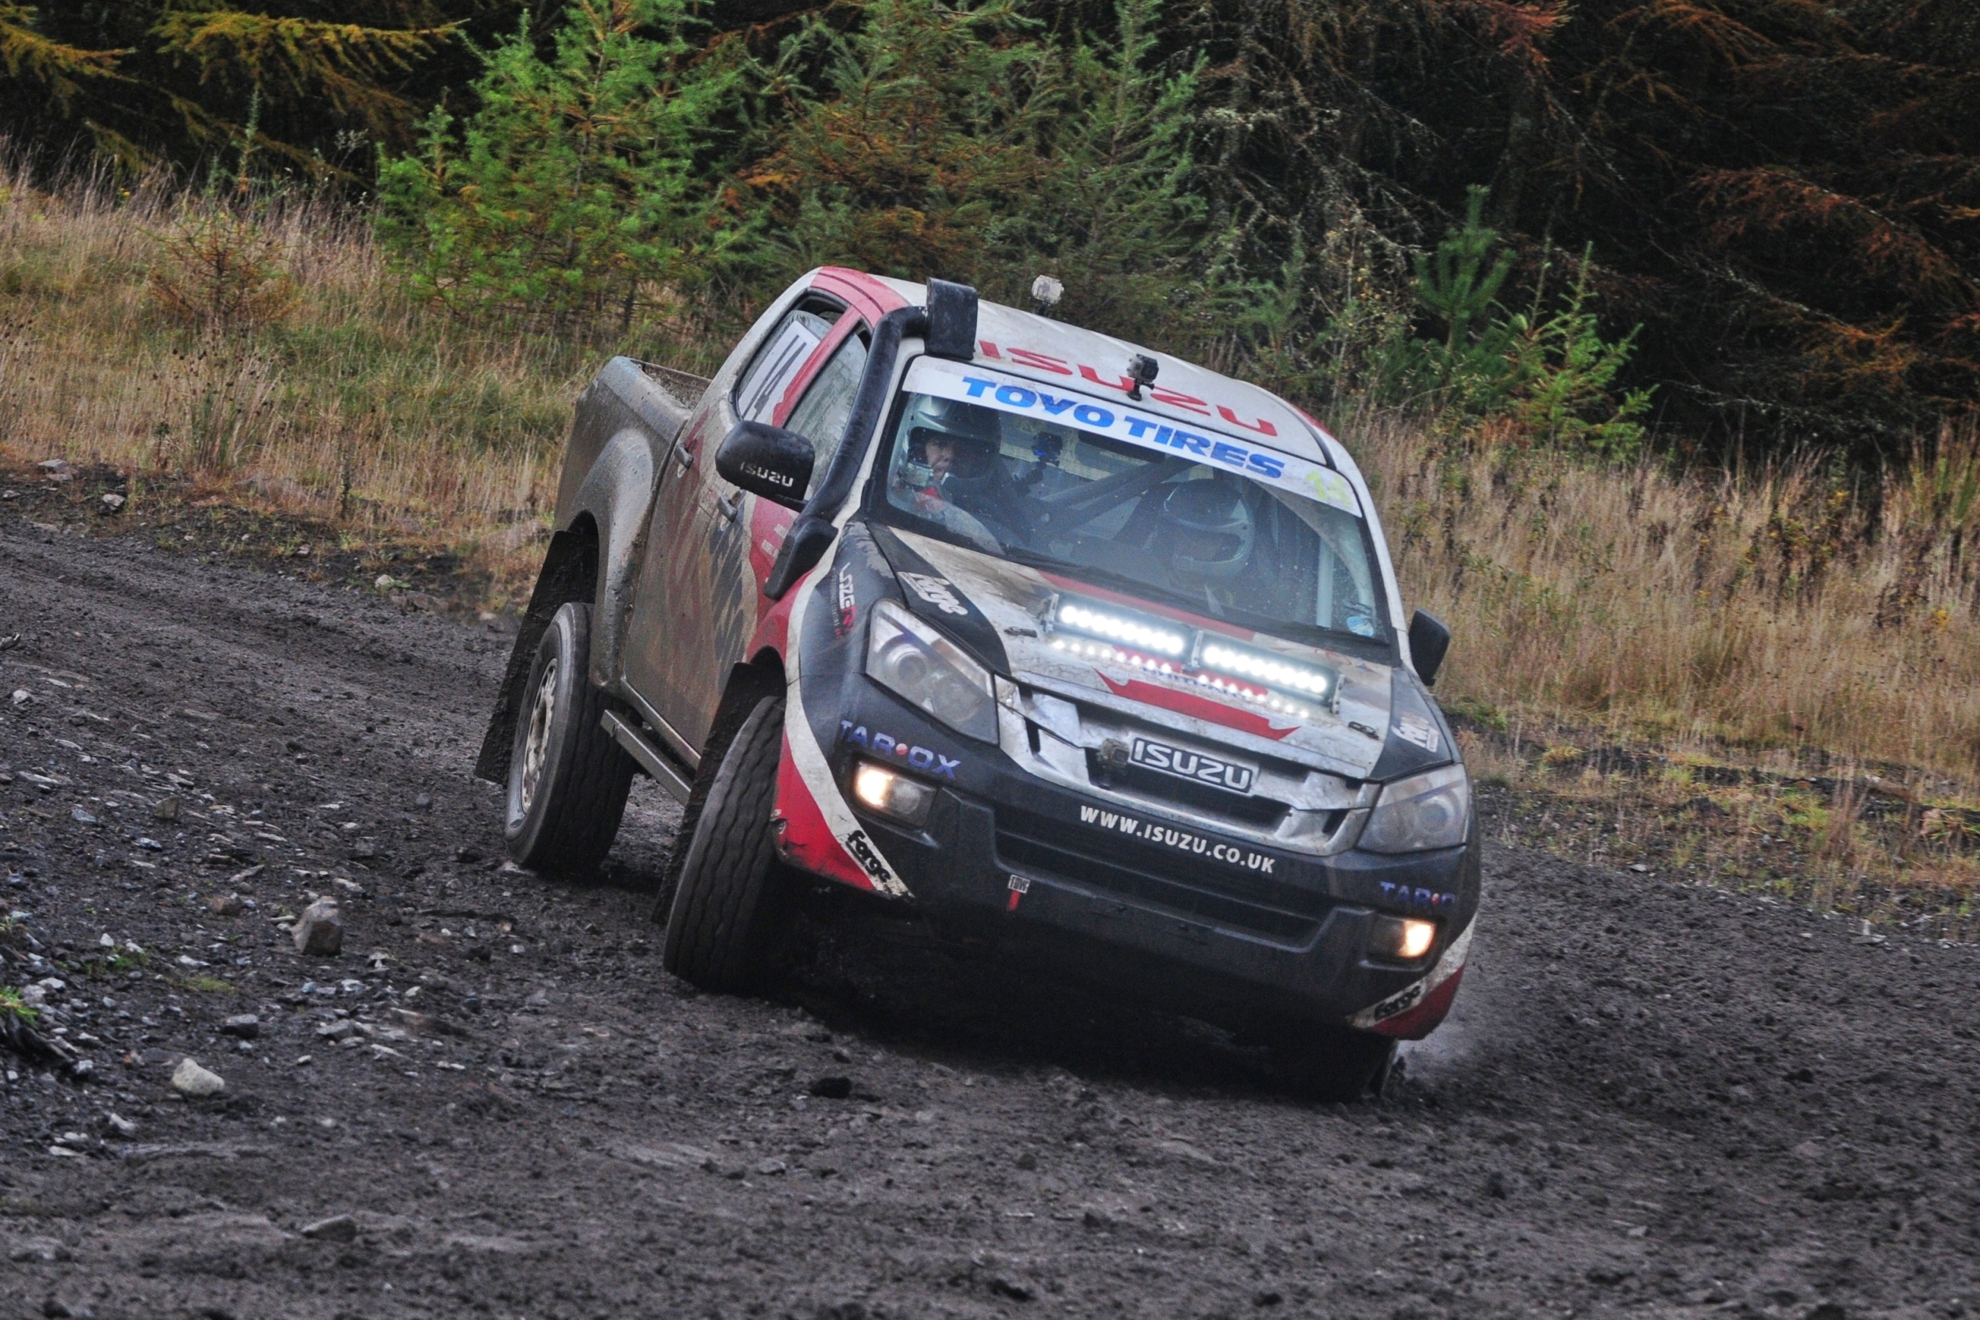 ISUZU D-MAX RALLY TEAM STORMS TO CLASS WIN IN DEBUT RALLY SEASON